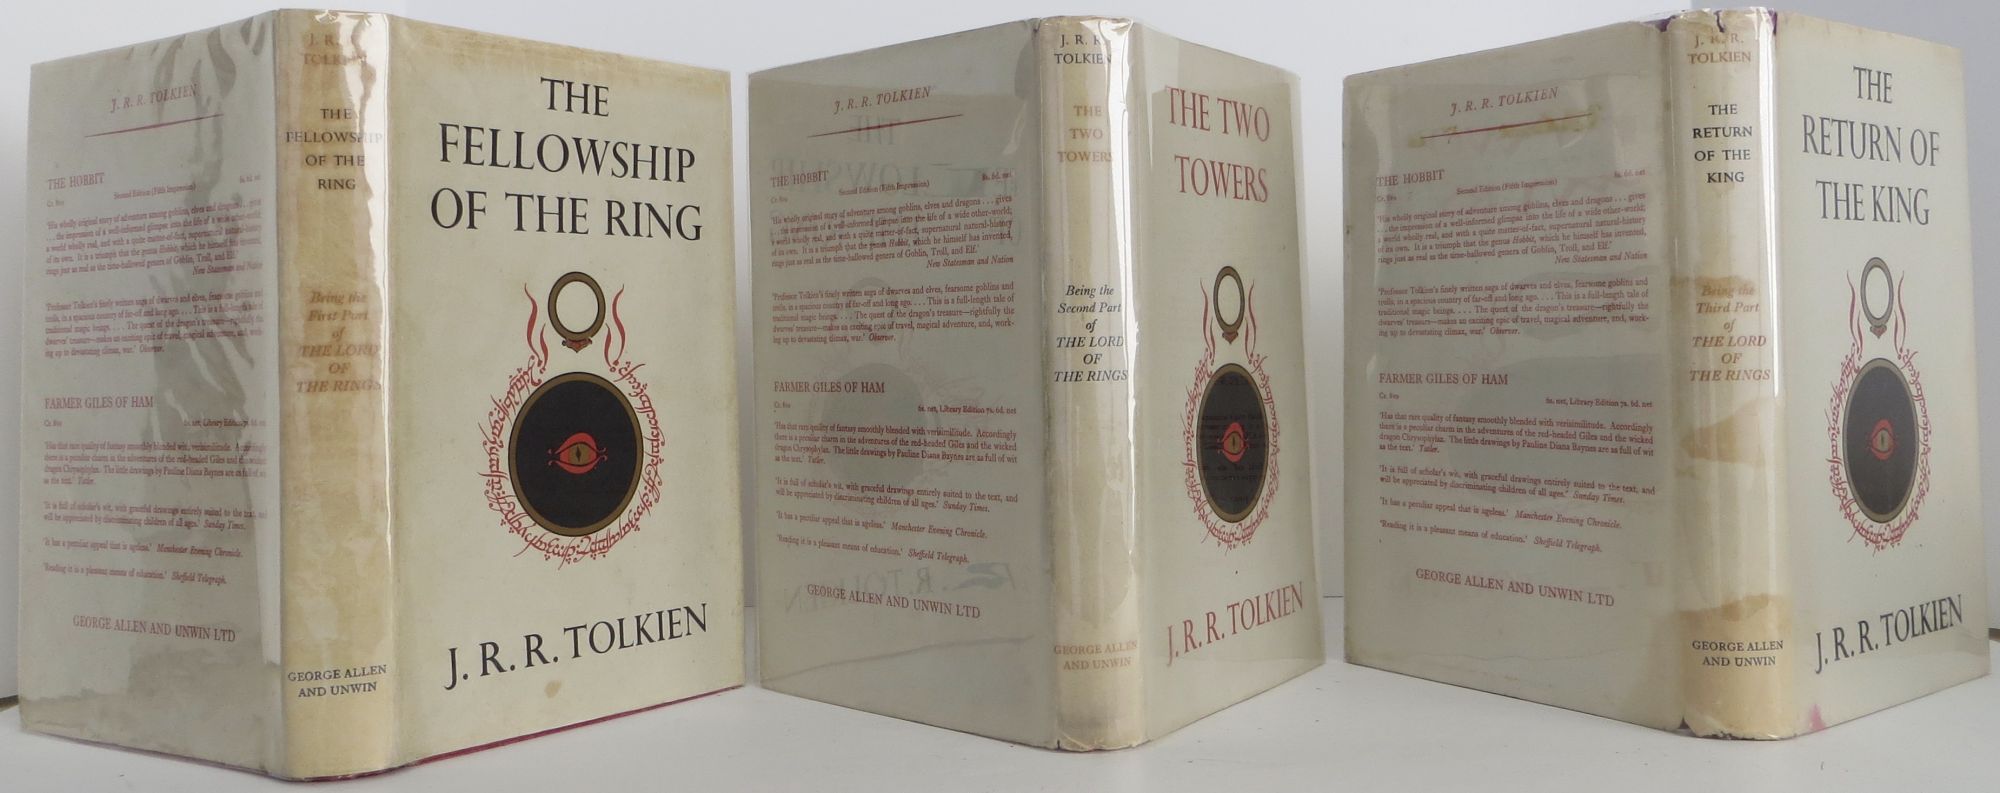 The Lord of the Rings-The Fellowship the Rings, The Two Towers and The Return of King | J. R. Tolkien | first, advance review copy